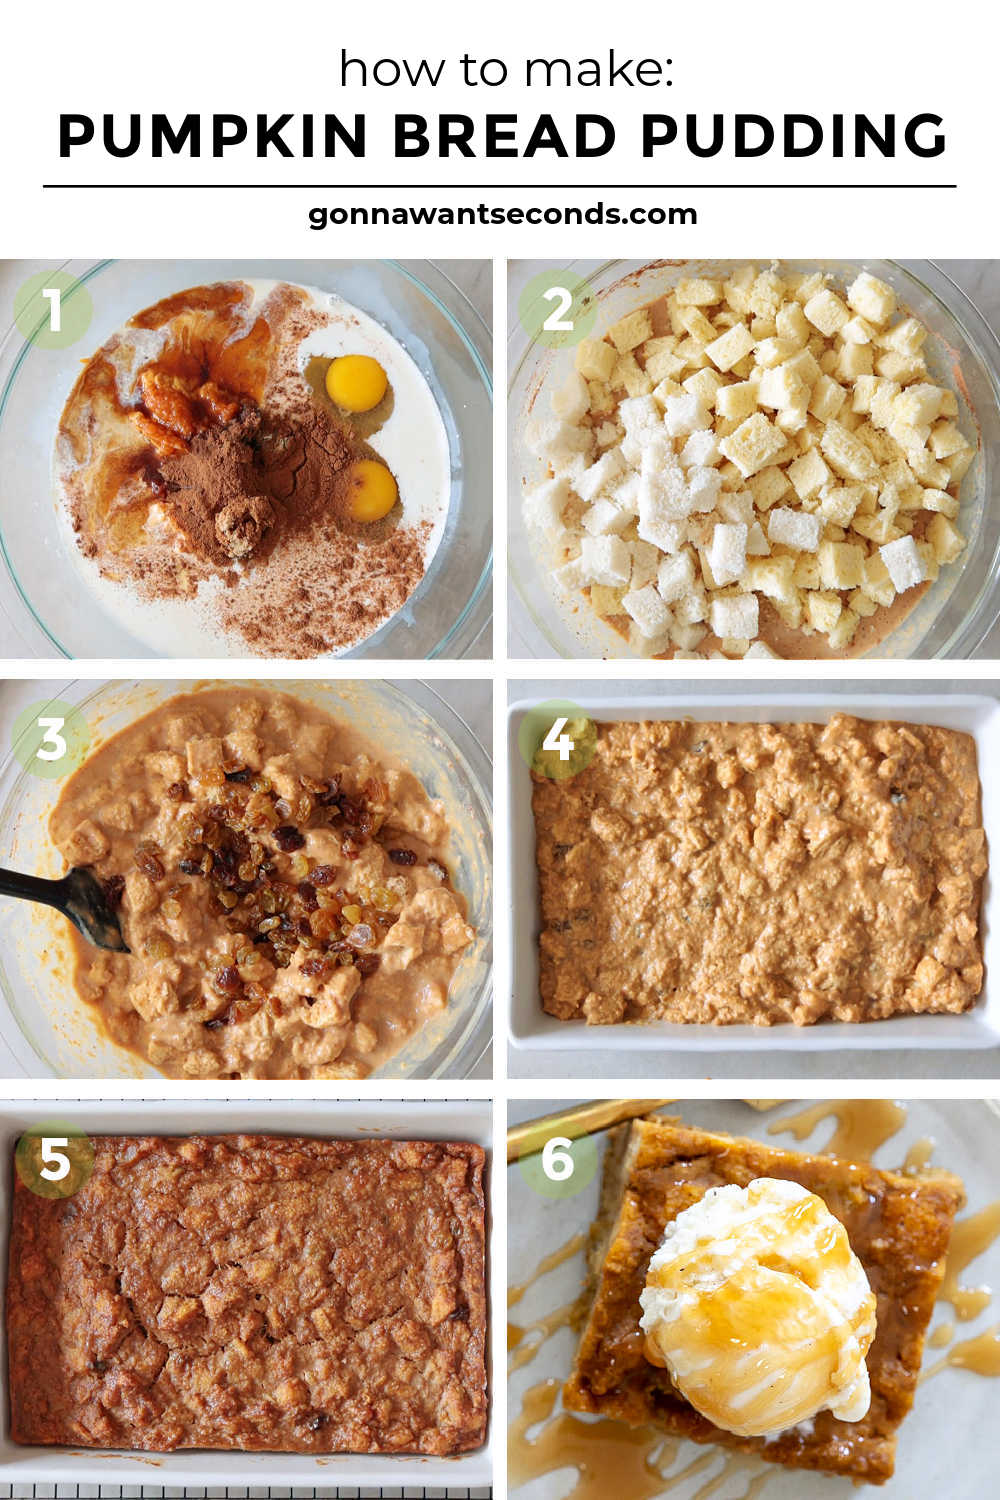 Step by step how to make pumpkin bread pudding